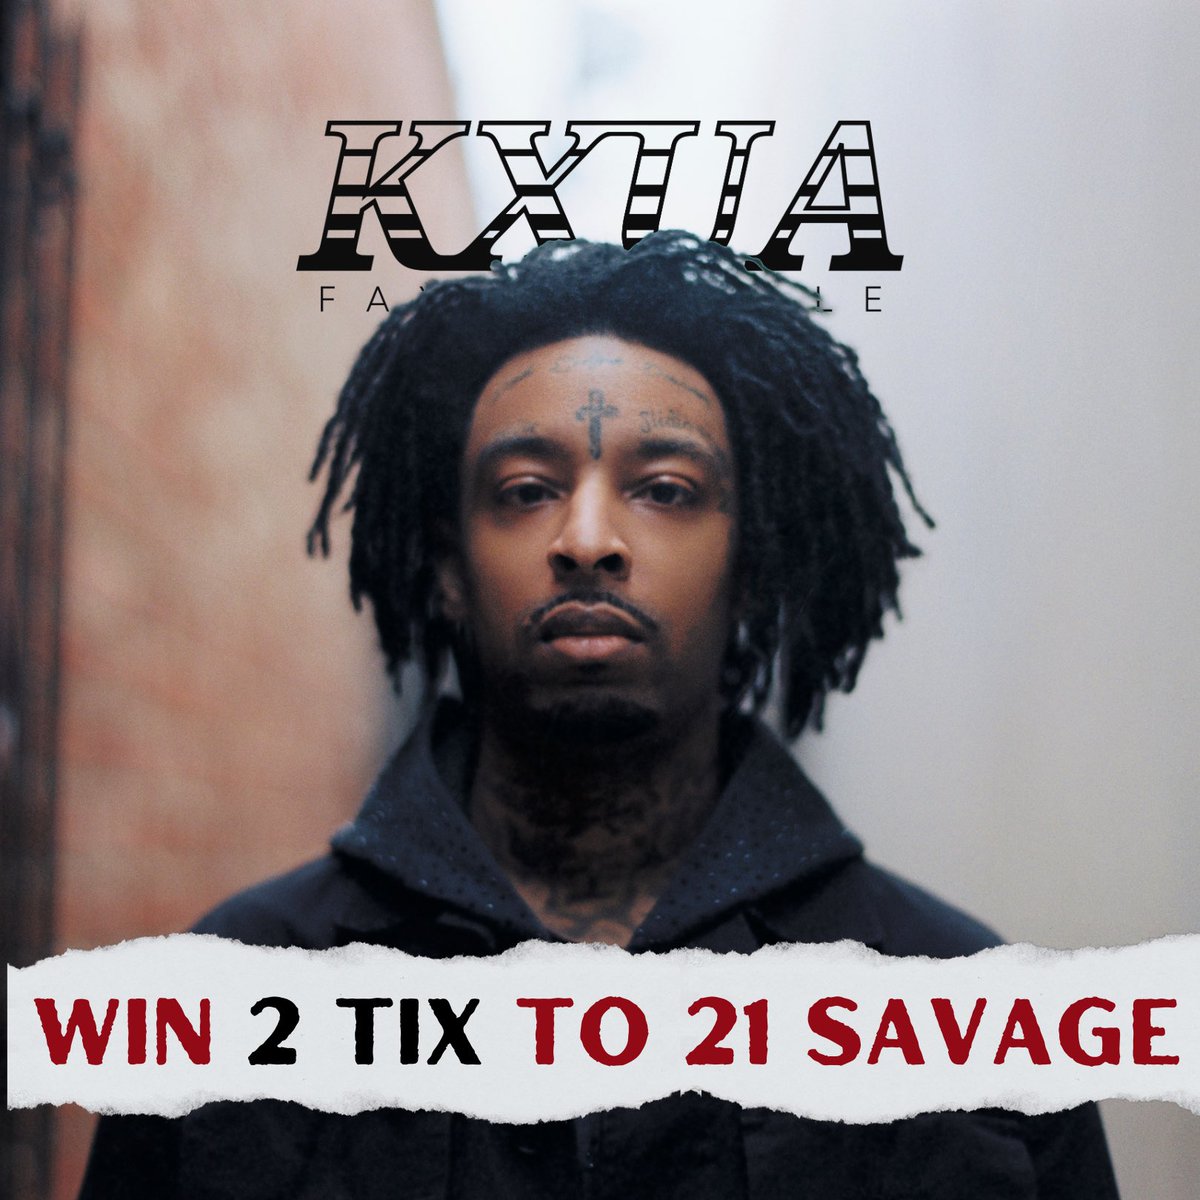 We’re giving away two tix to 21 Savage at the Walmart AMP! Twitter won’t let us link a competing social media platform, but go check out @kxua on another social media platform (that starts with “I” and ends with “gram”) for more info!